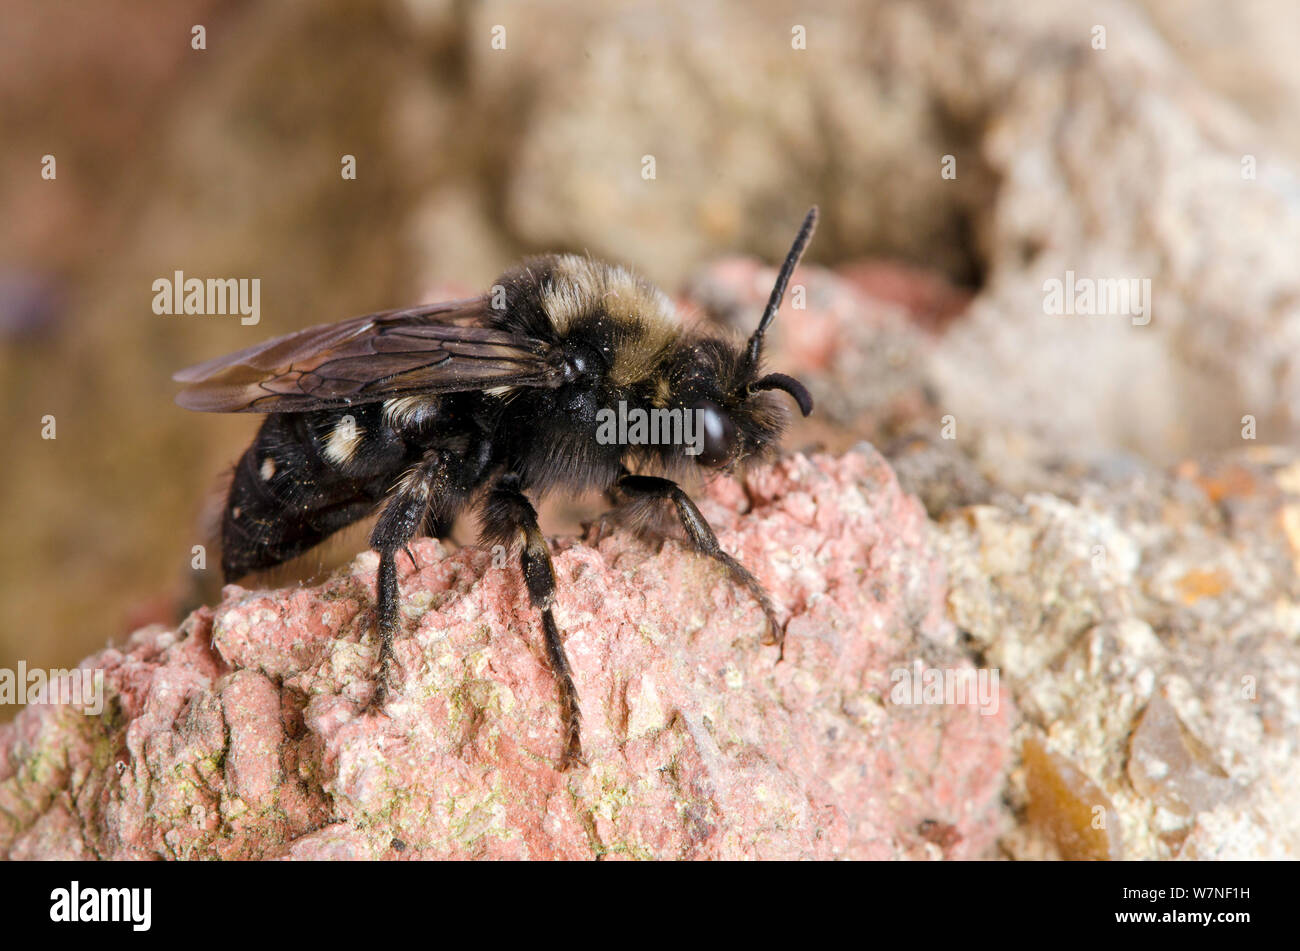 Cuckoo bee (Melecta albifrons) parasite of (Anthophora plumipes) on old wall where host species nests, Hertfordshire, England, UK, April Stock Photo